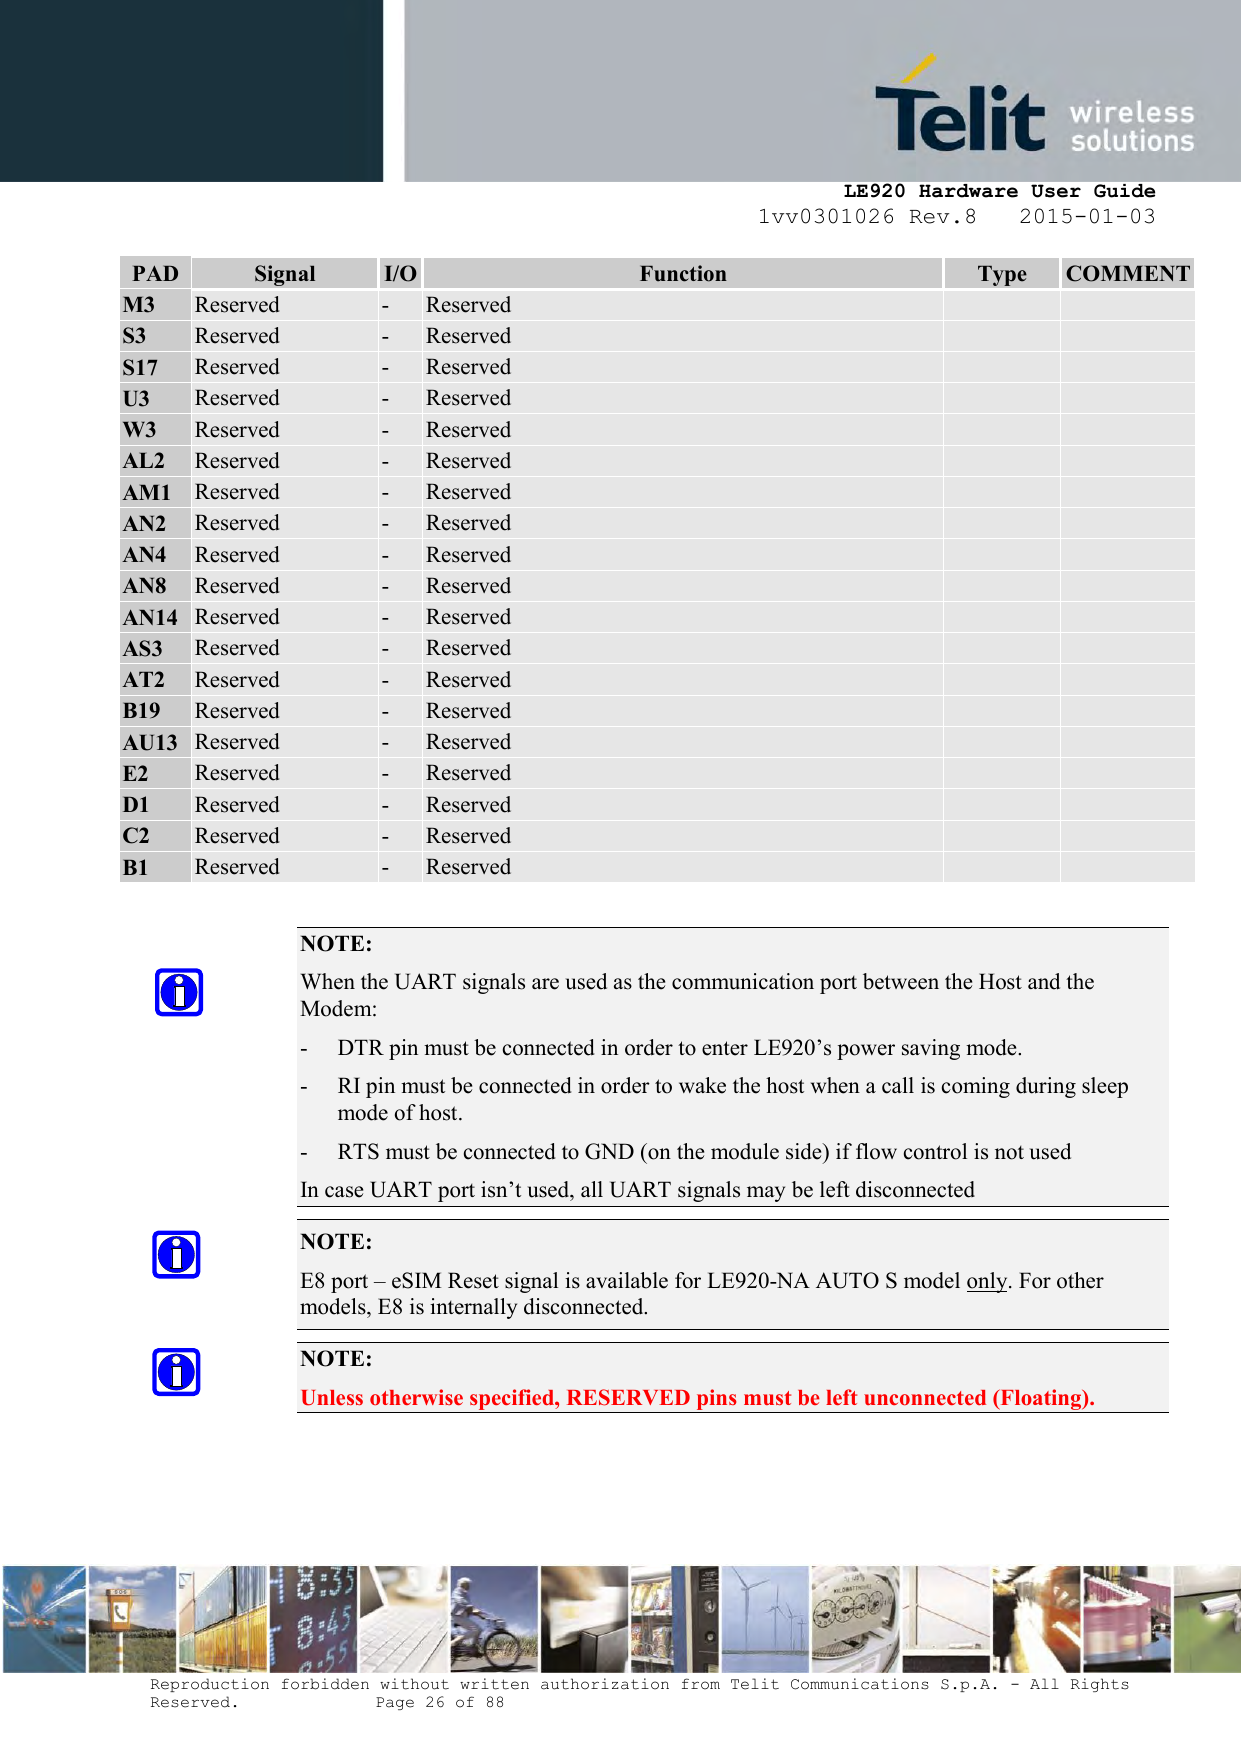     LE920 Hardware User Guide 1vv0301026 Rev.8   2015-01-03 Reproduction forbidden without written authorization from Telit Communications S.p.A. - All Rights Reserved.    Page 26 of 88  PAD Signal I/O Function Type COMMENT M3 Reserved - Reserved   S3 Reserved - Reserved   S17 Reserved - Reserved   U3 Reserved - Reserved     W3 Reserved - Reserved   AL2 Reserved - Reserved   AM1 Reserved - Reserved   AN2 Reserved - Reserved   AN4 Reserved - Reserved   AN8 Reserved - Reserved   AN14 Reserved - Reserved   AS3 Reserved - Reserved   AT2 Reserved - Reserved   B19 Reserved - Reserved   AU13 Reserved - Reserved   E2 Reserved - Reserved   D1 Reserved - Reserved   C2 Reserved - Reserved   B1 Reserved - Reserved    NOTE:  When the UART signals are used as the communication port between the Host and the Modem: - DTR pin must be connected in order to enter LE920’s power saving mode. - RI pin must be connected in order to wake the host when a call is coming during sleep mode of host. - RTS must be connected to GND (on the module side) if flow control is not used  In case UART port isn’t used, all UART signals may be left disconnected NOTE:  E8 port – eSIM Reset signal is available for LE920-NA AUTO S model only. For other models, E8 is internally disconnected.  NOTE:  Unless otherwise specified, RESERVED pins must be left unconnected (Floating).       